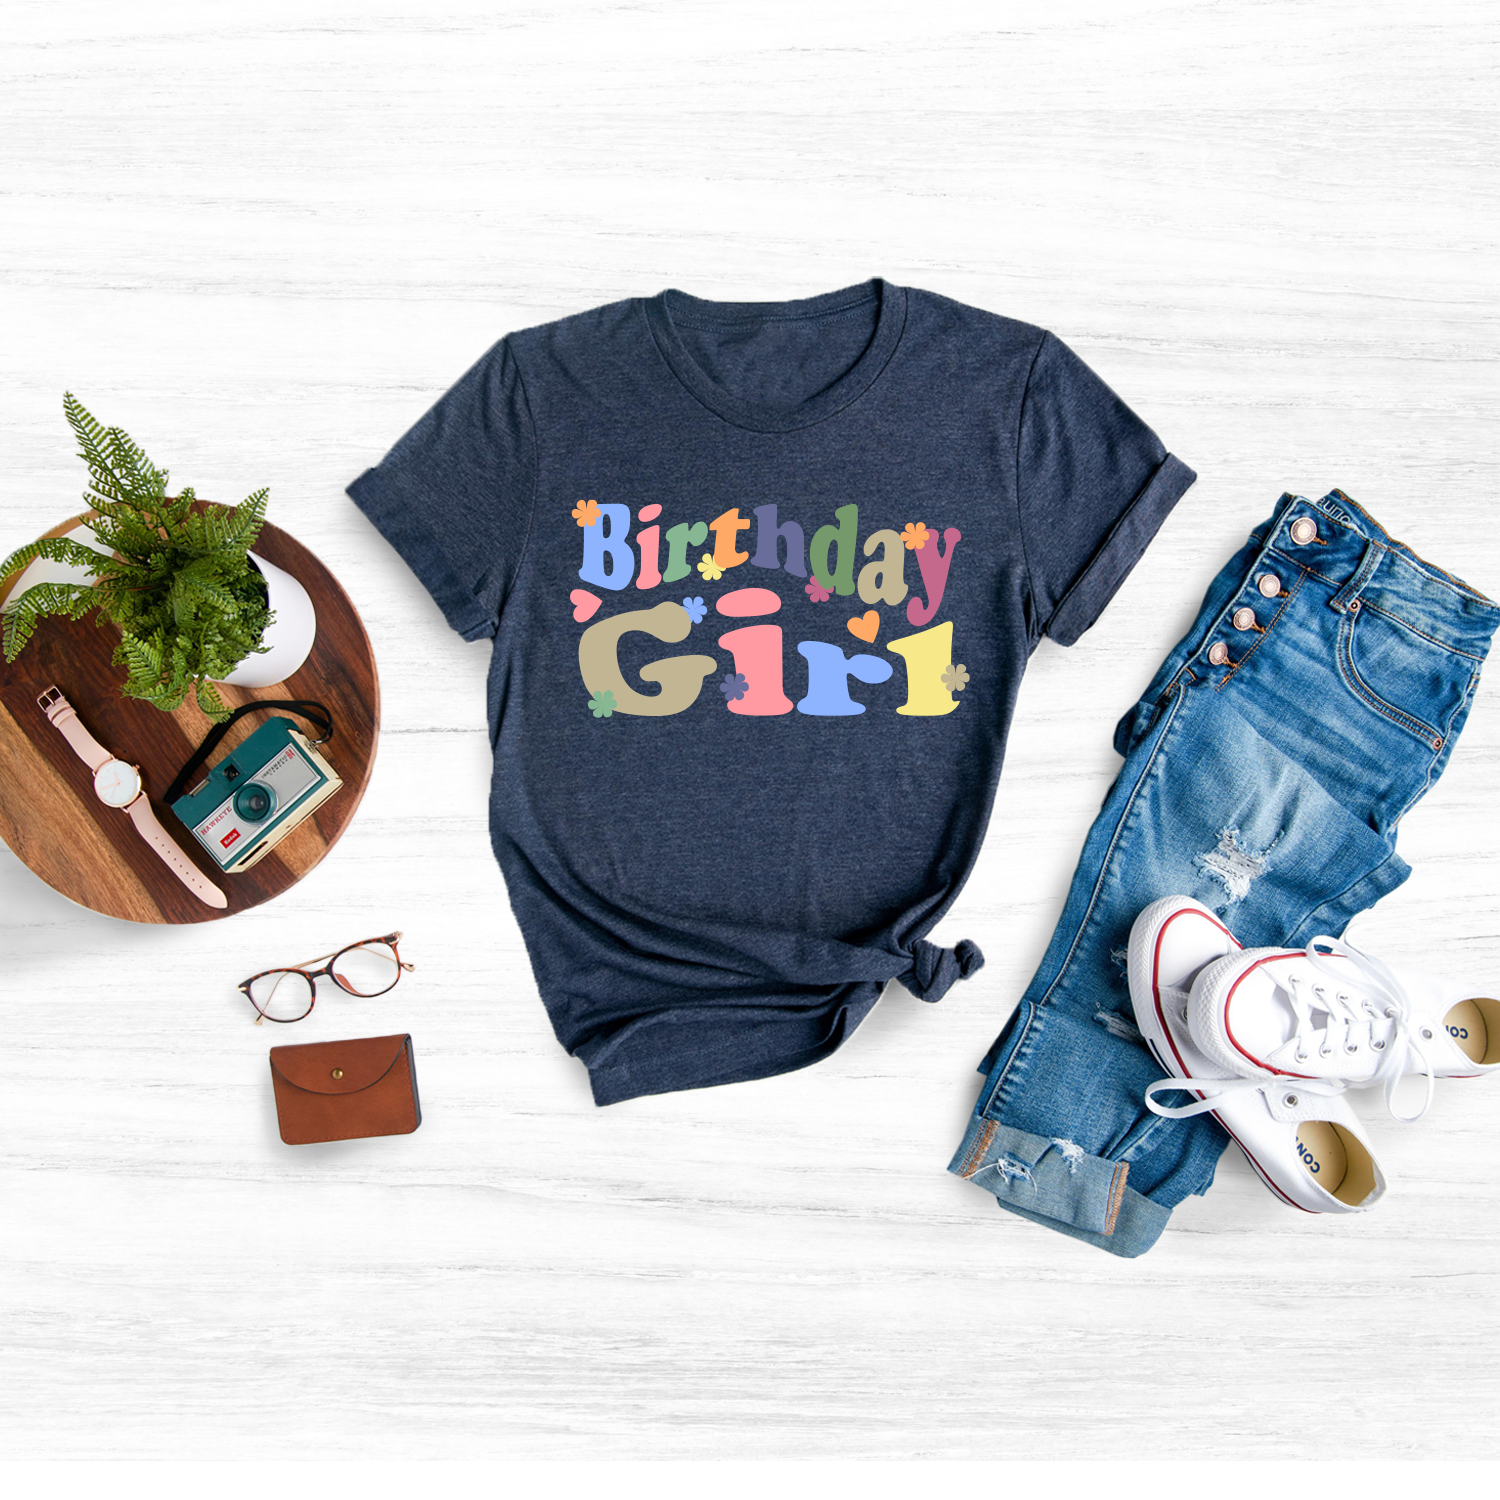 Grab this adorable retro birthday shirt and celebrate her special day in style